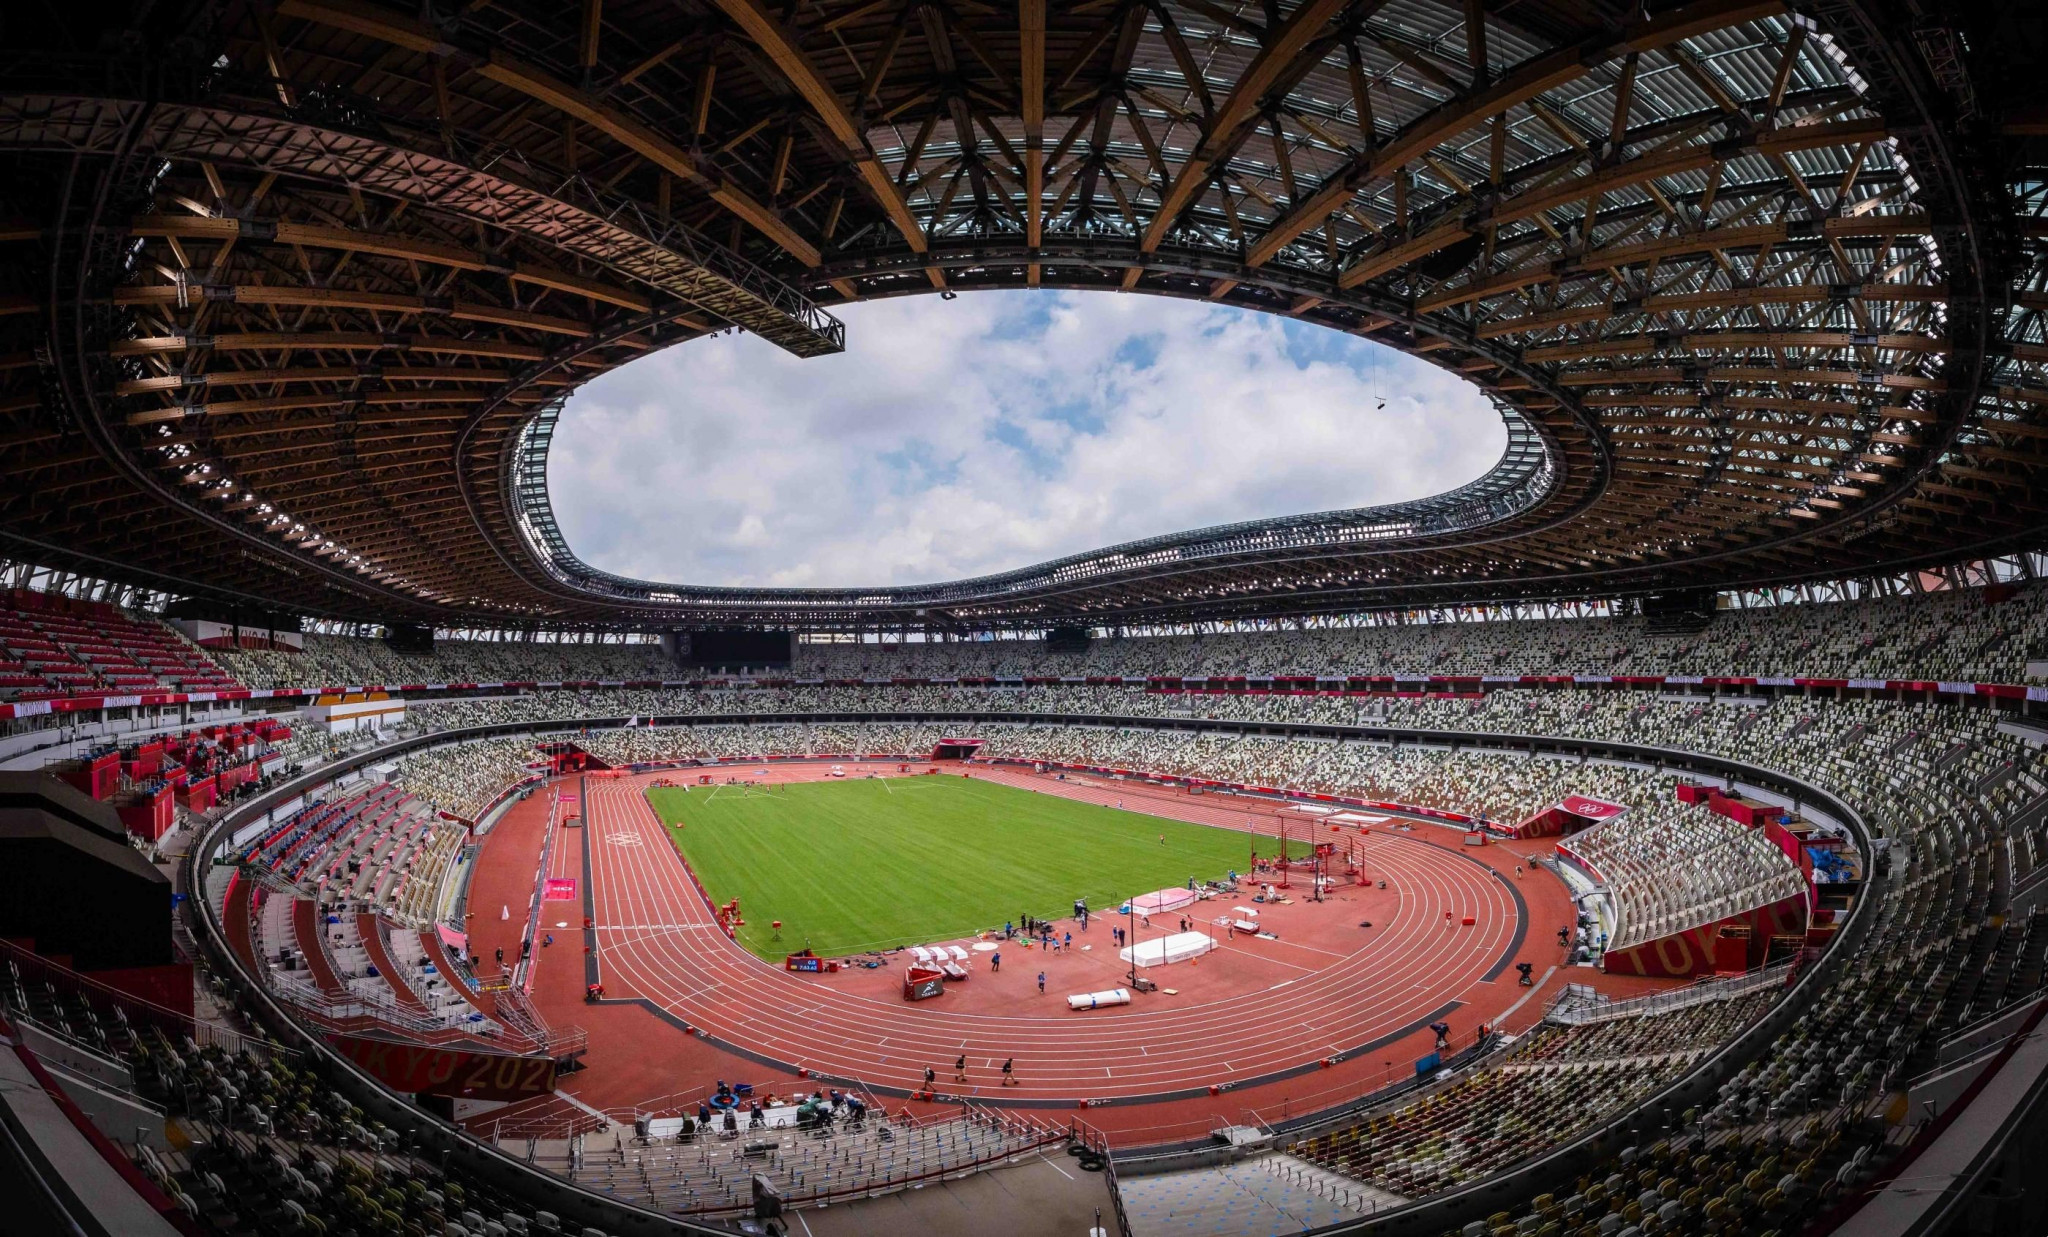 Tokyo has been announced as the host of the 2025 World Athletics Championships, with competition set to be held at the Olympic Stadium ©Dan Vernon